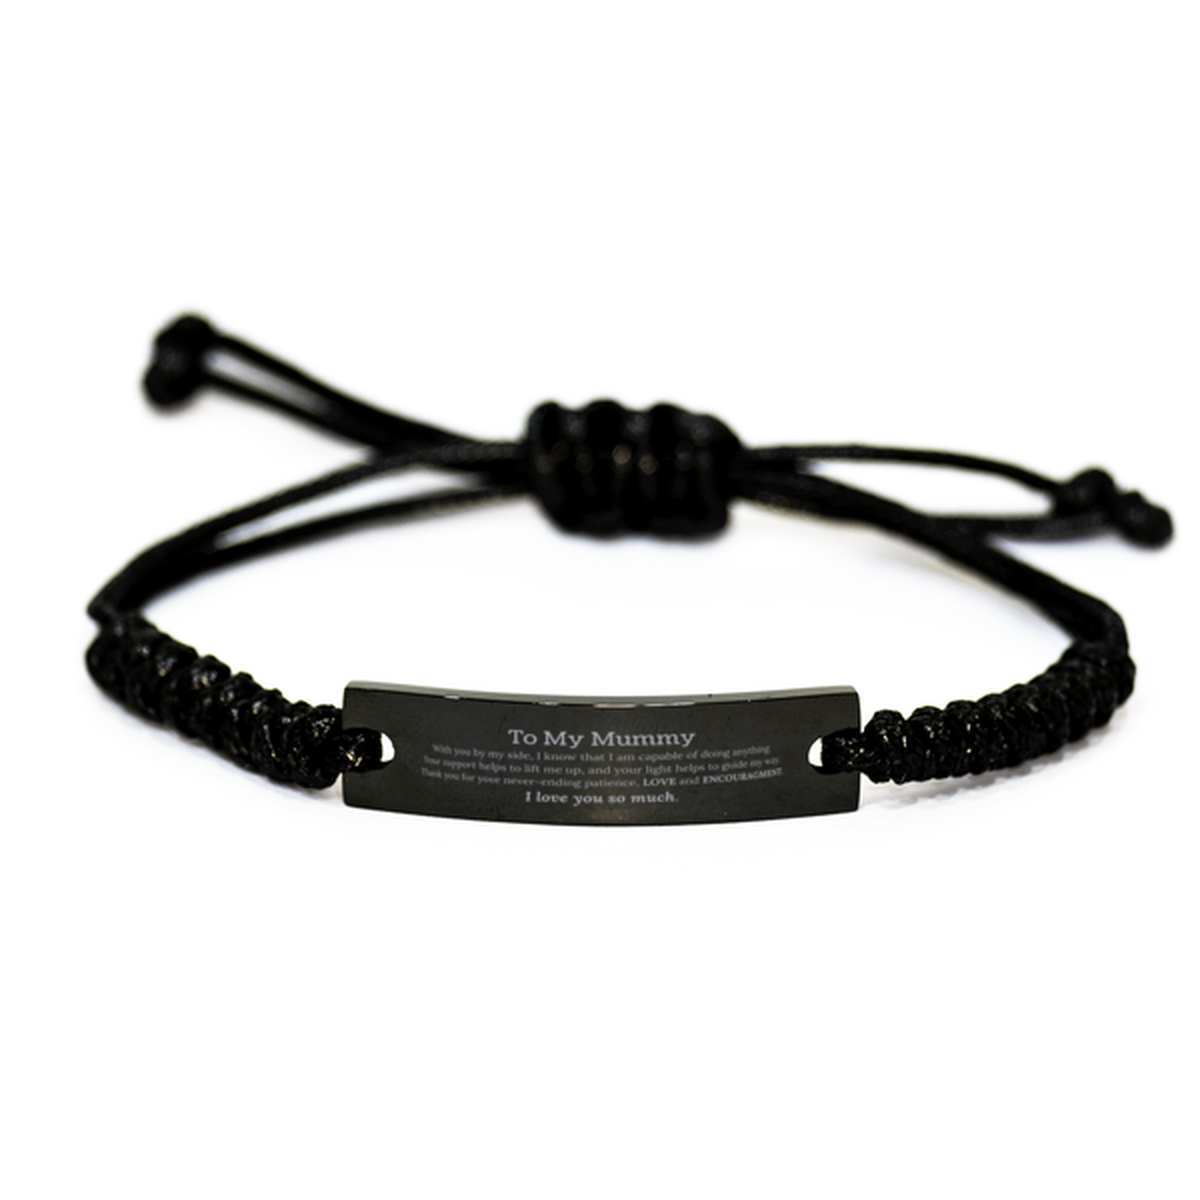 Appreciation Mummy Black Rope Bracelet Gifts, To My Mummy Birthday Christmas Wedding Keepsake Gifts for Mummy With you by my side, I know that I am capable of doing anything. I love you so much